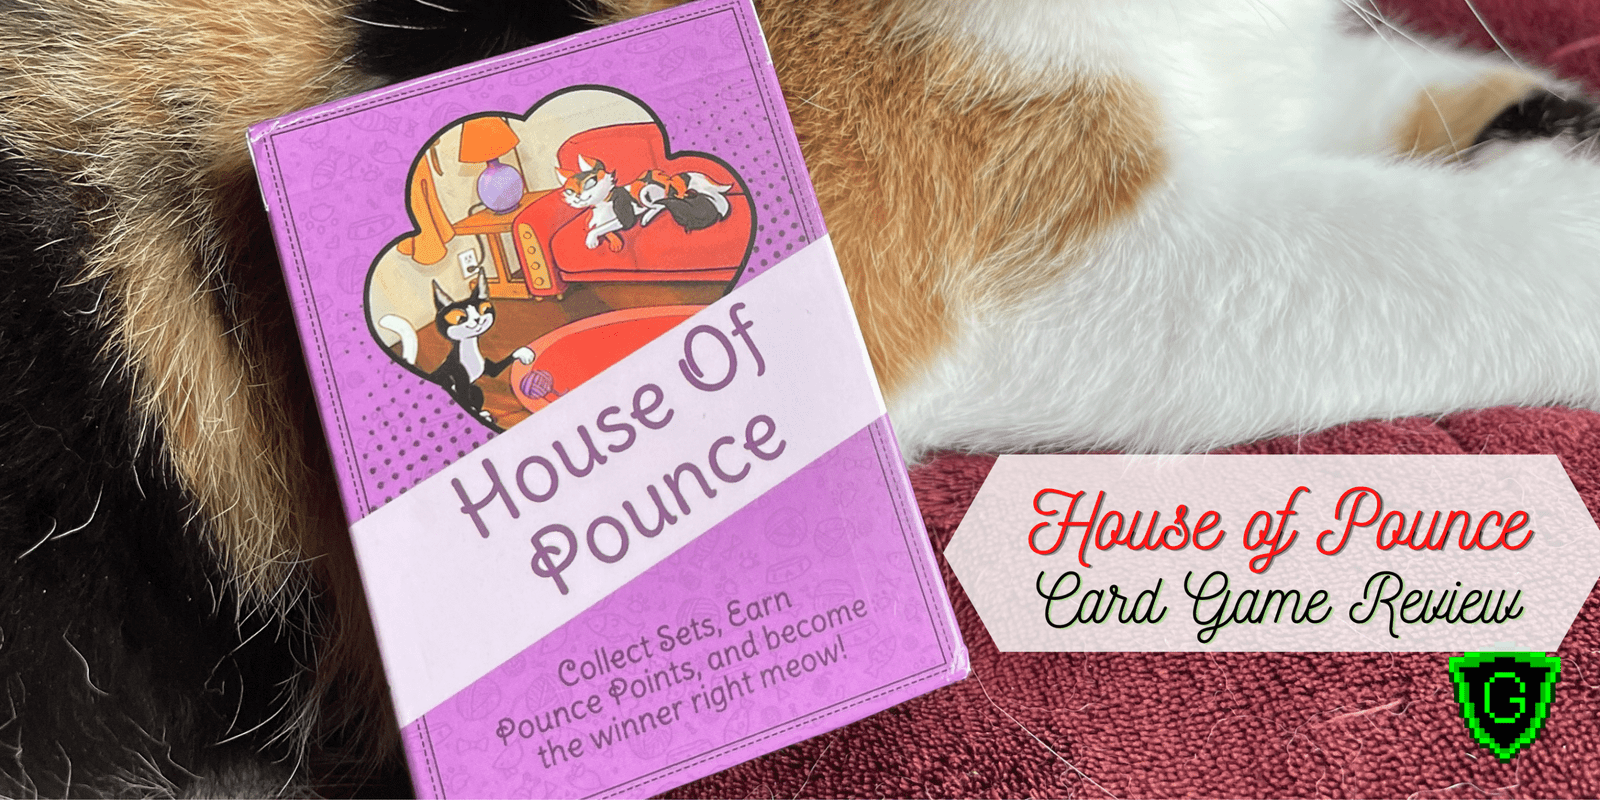 Header image for house of pounce review